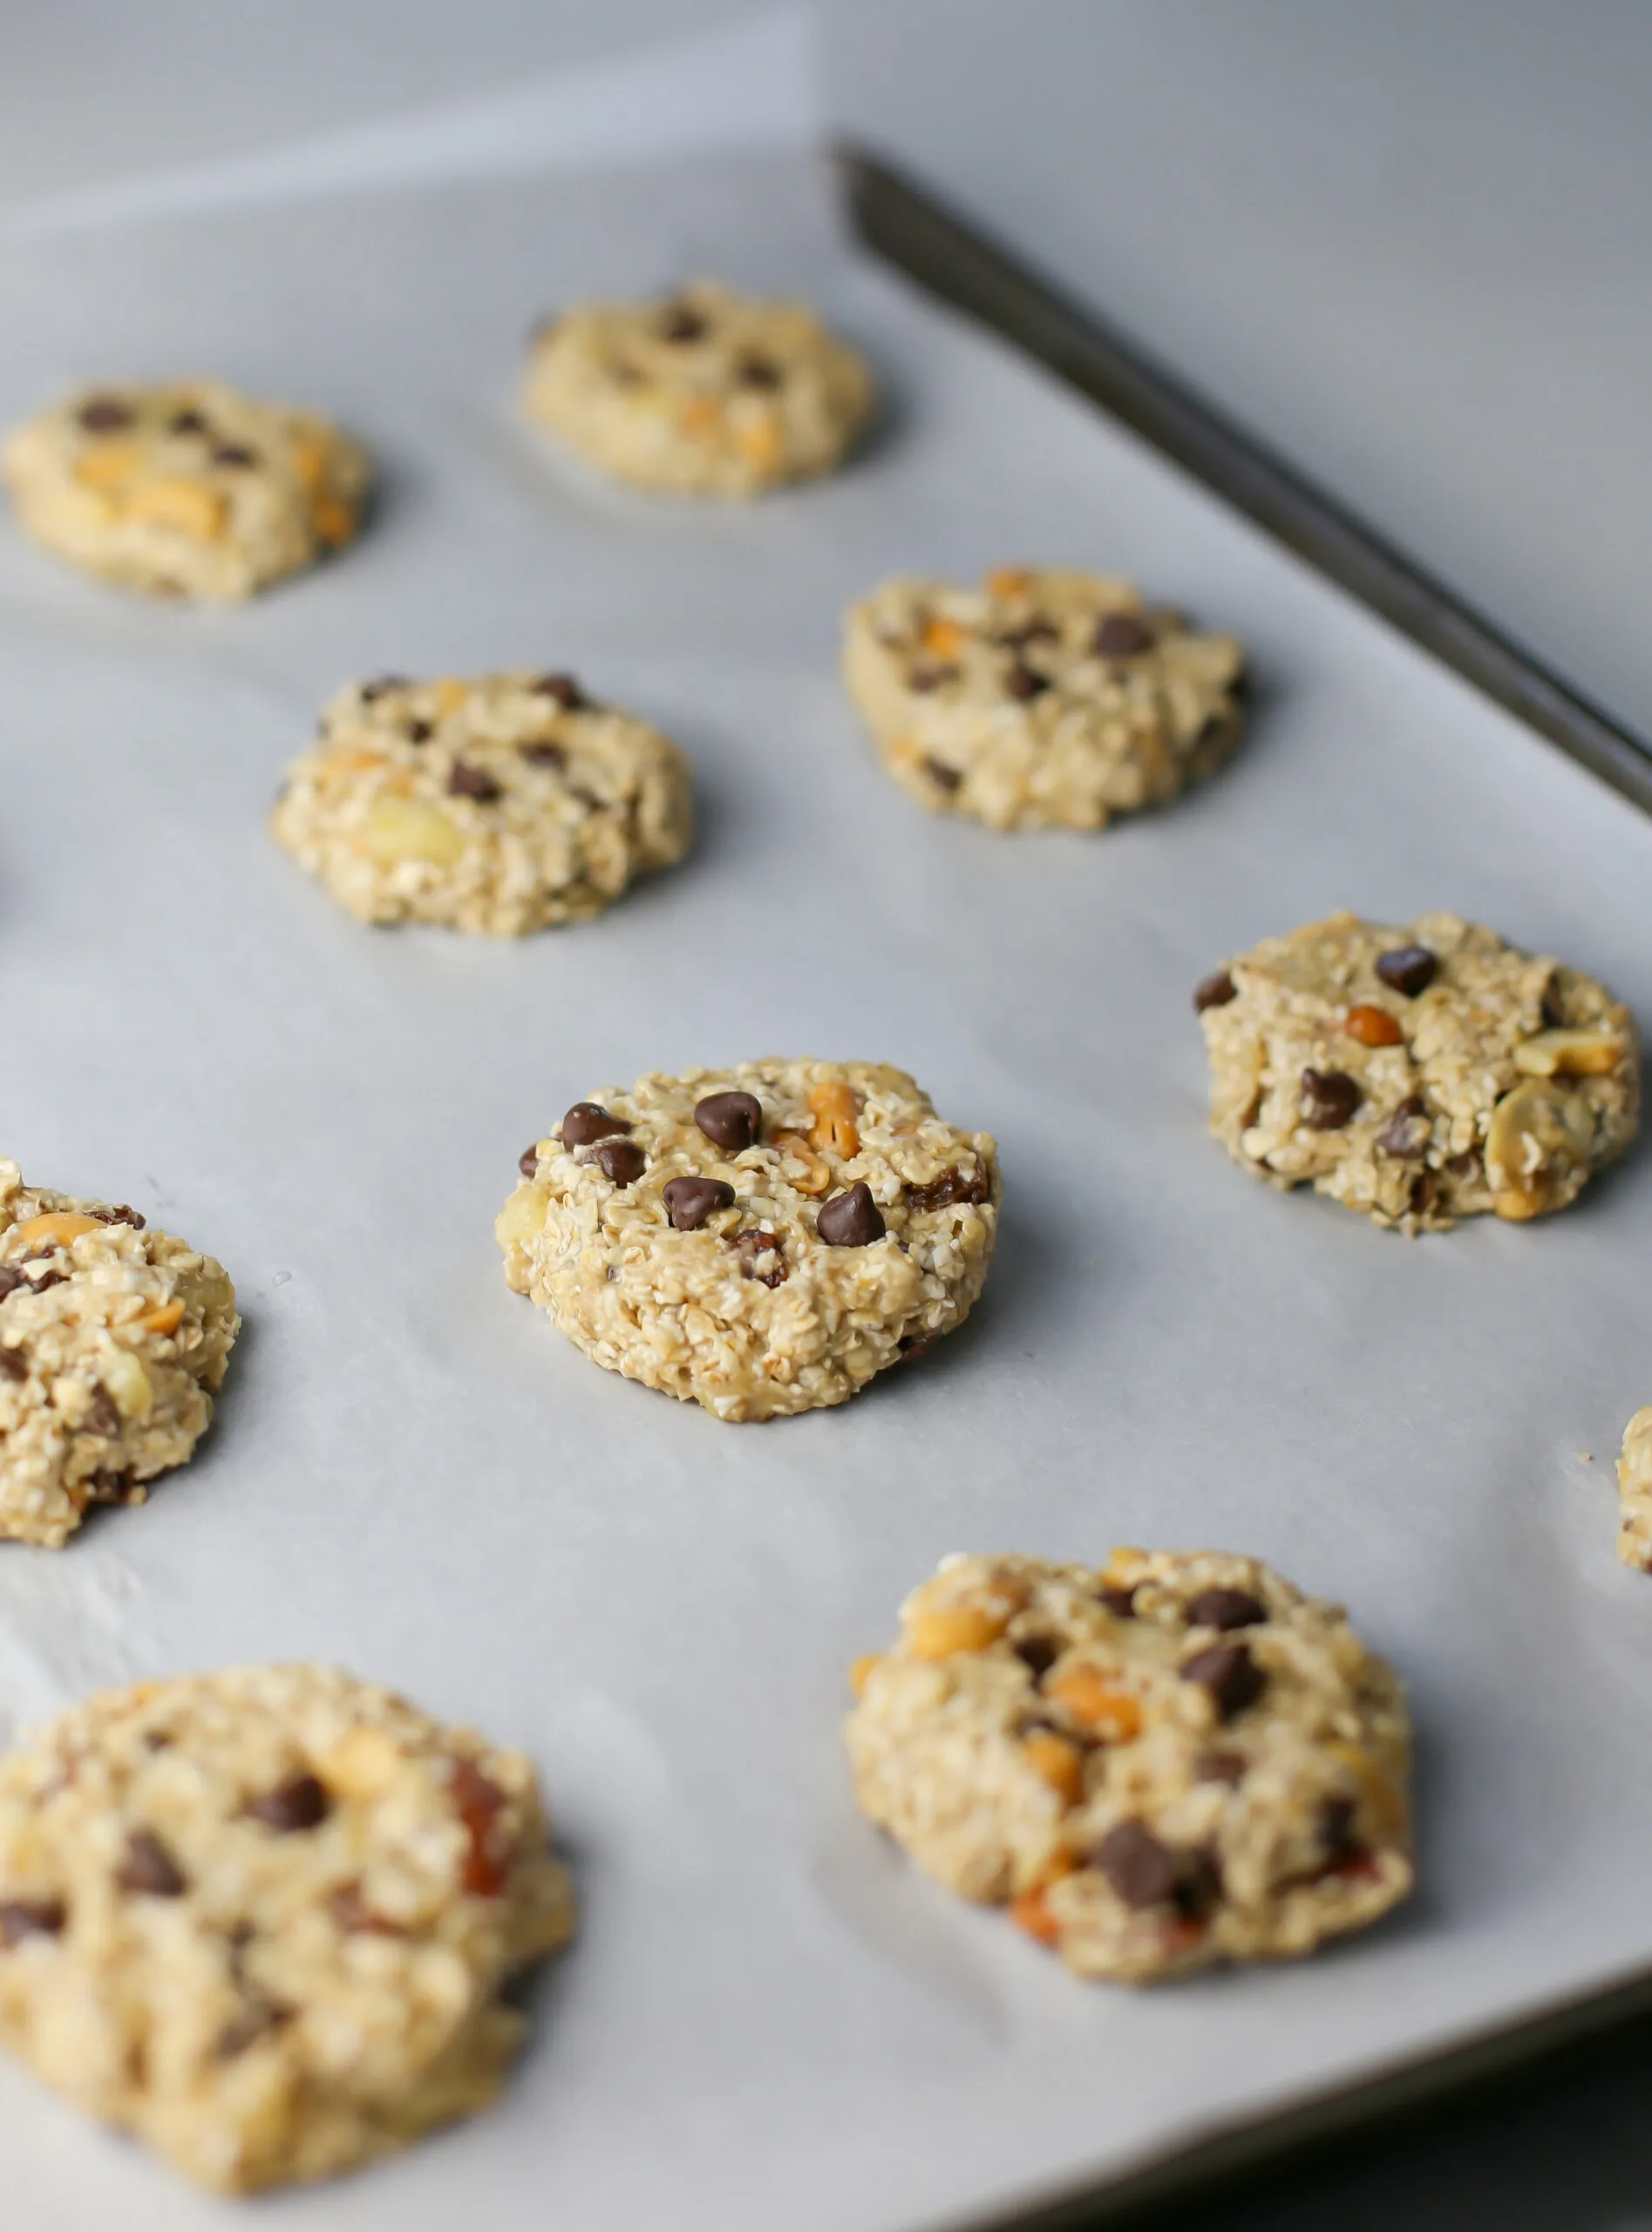 Unbaked trail mix cookies on a parchment paper lined baking sheet.